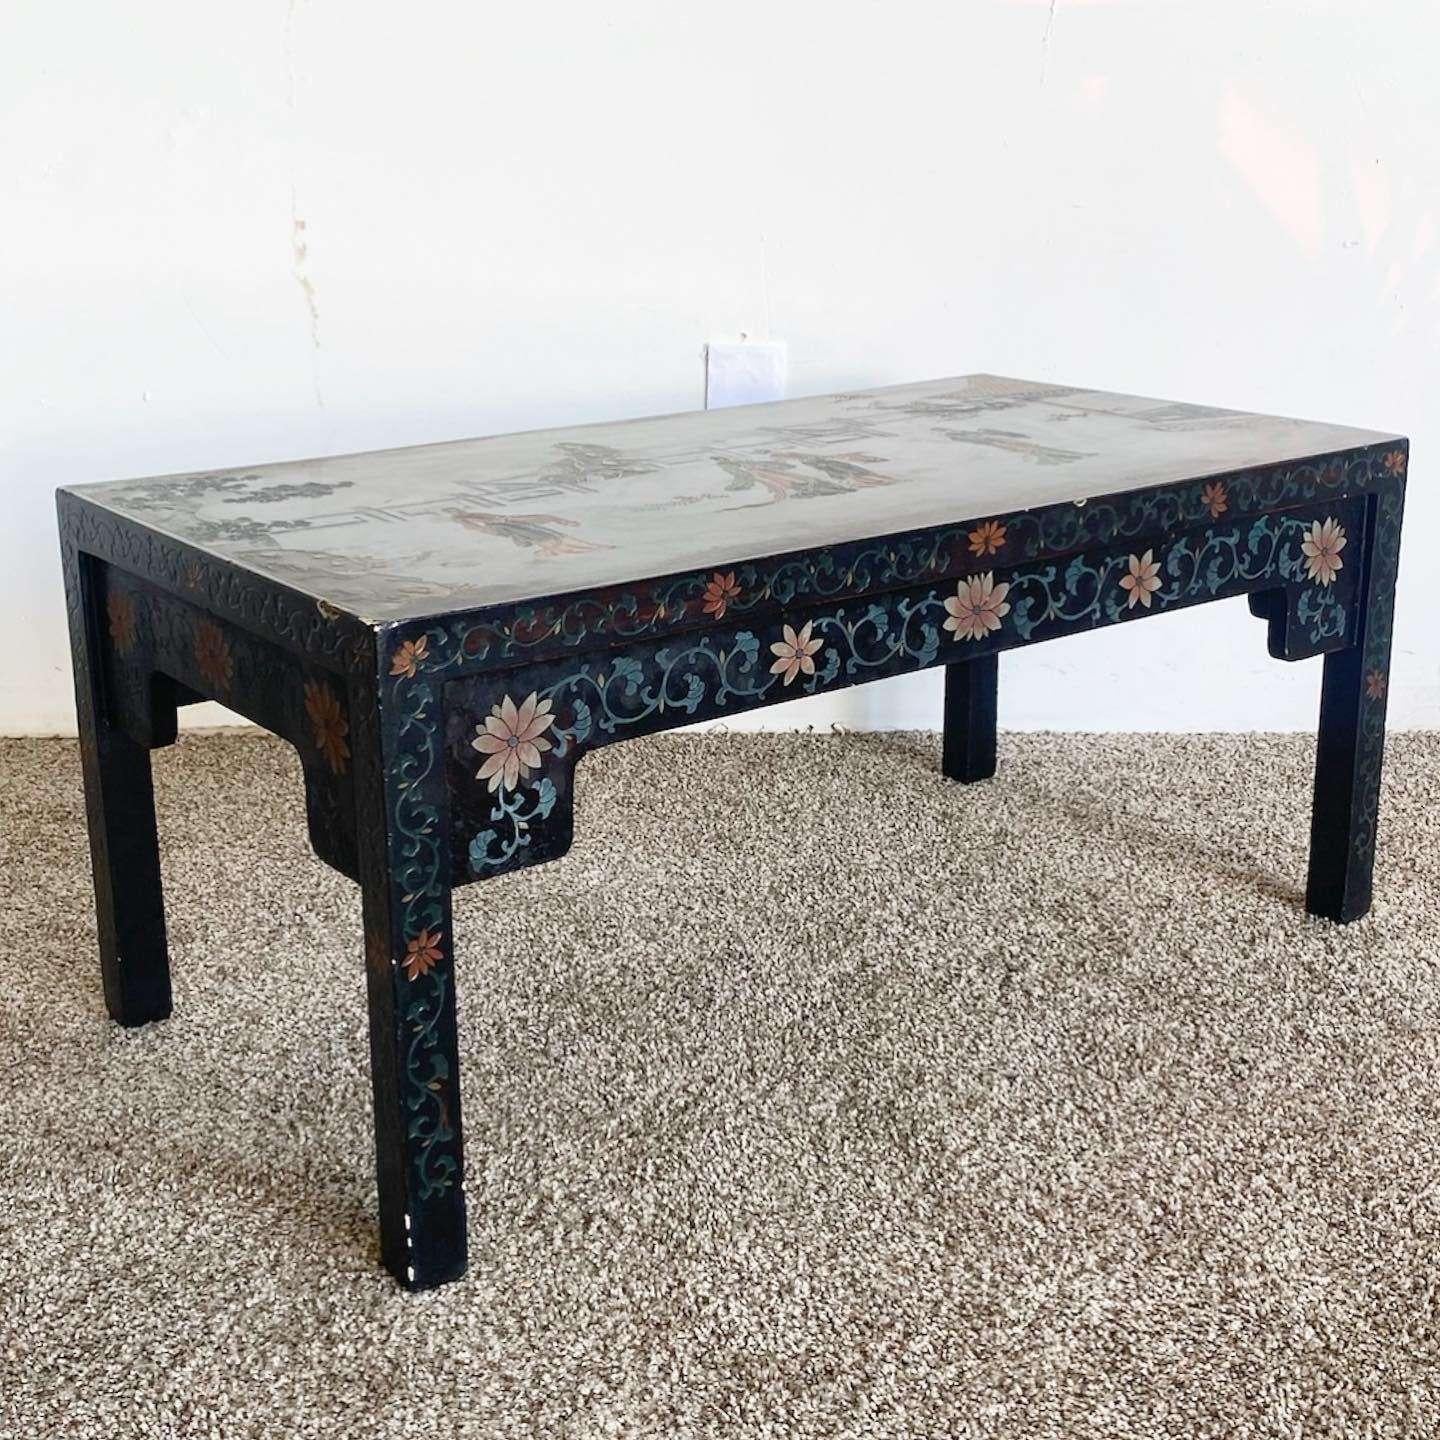 Exceptional vintage chinoiserie black lacquered rectangular coffee table. Features a hand carved and painted design throughout the table.
